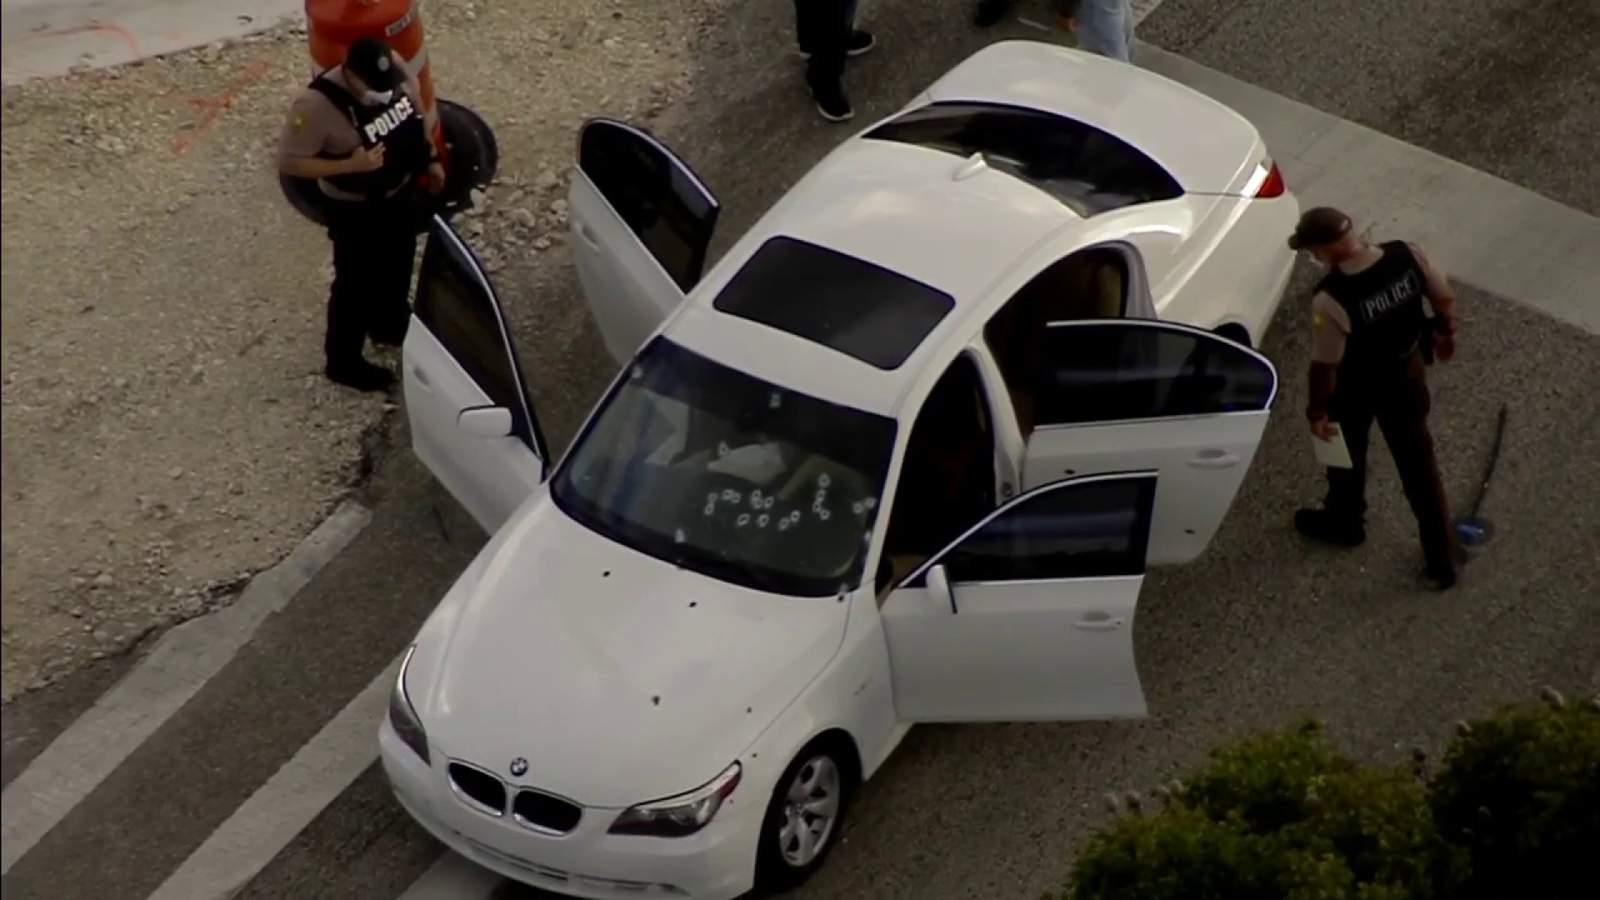 2 teenagers shot in a car in southwest Miami-Dade